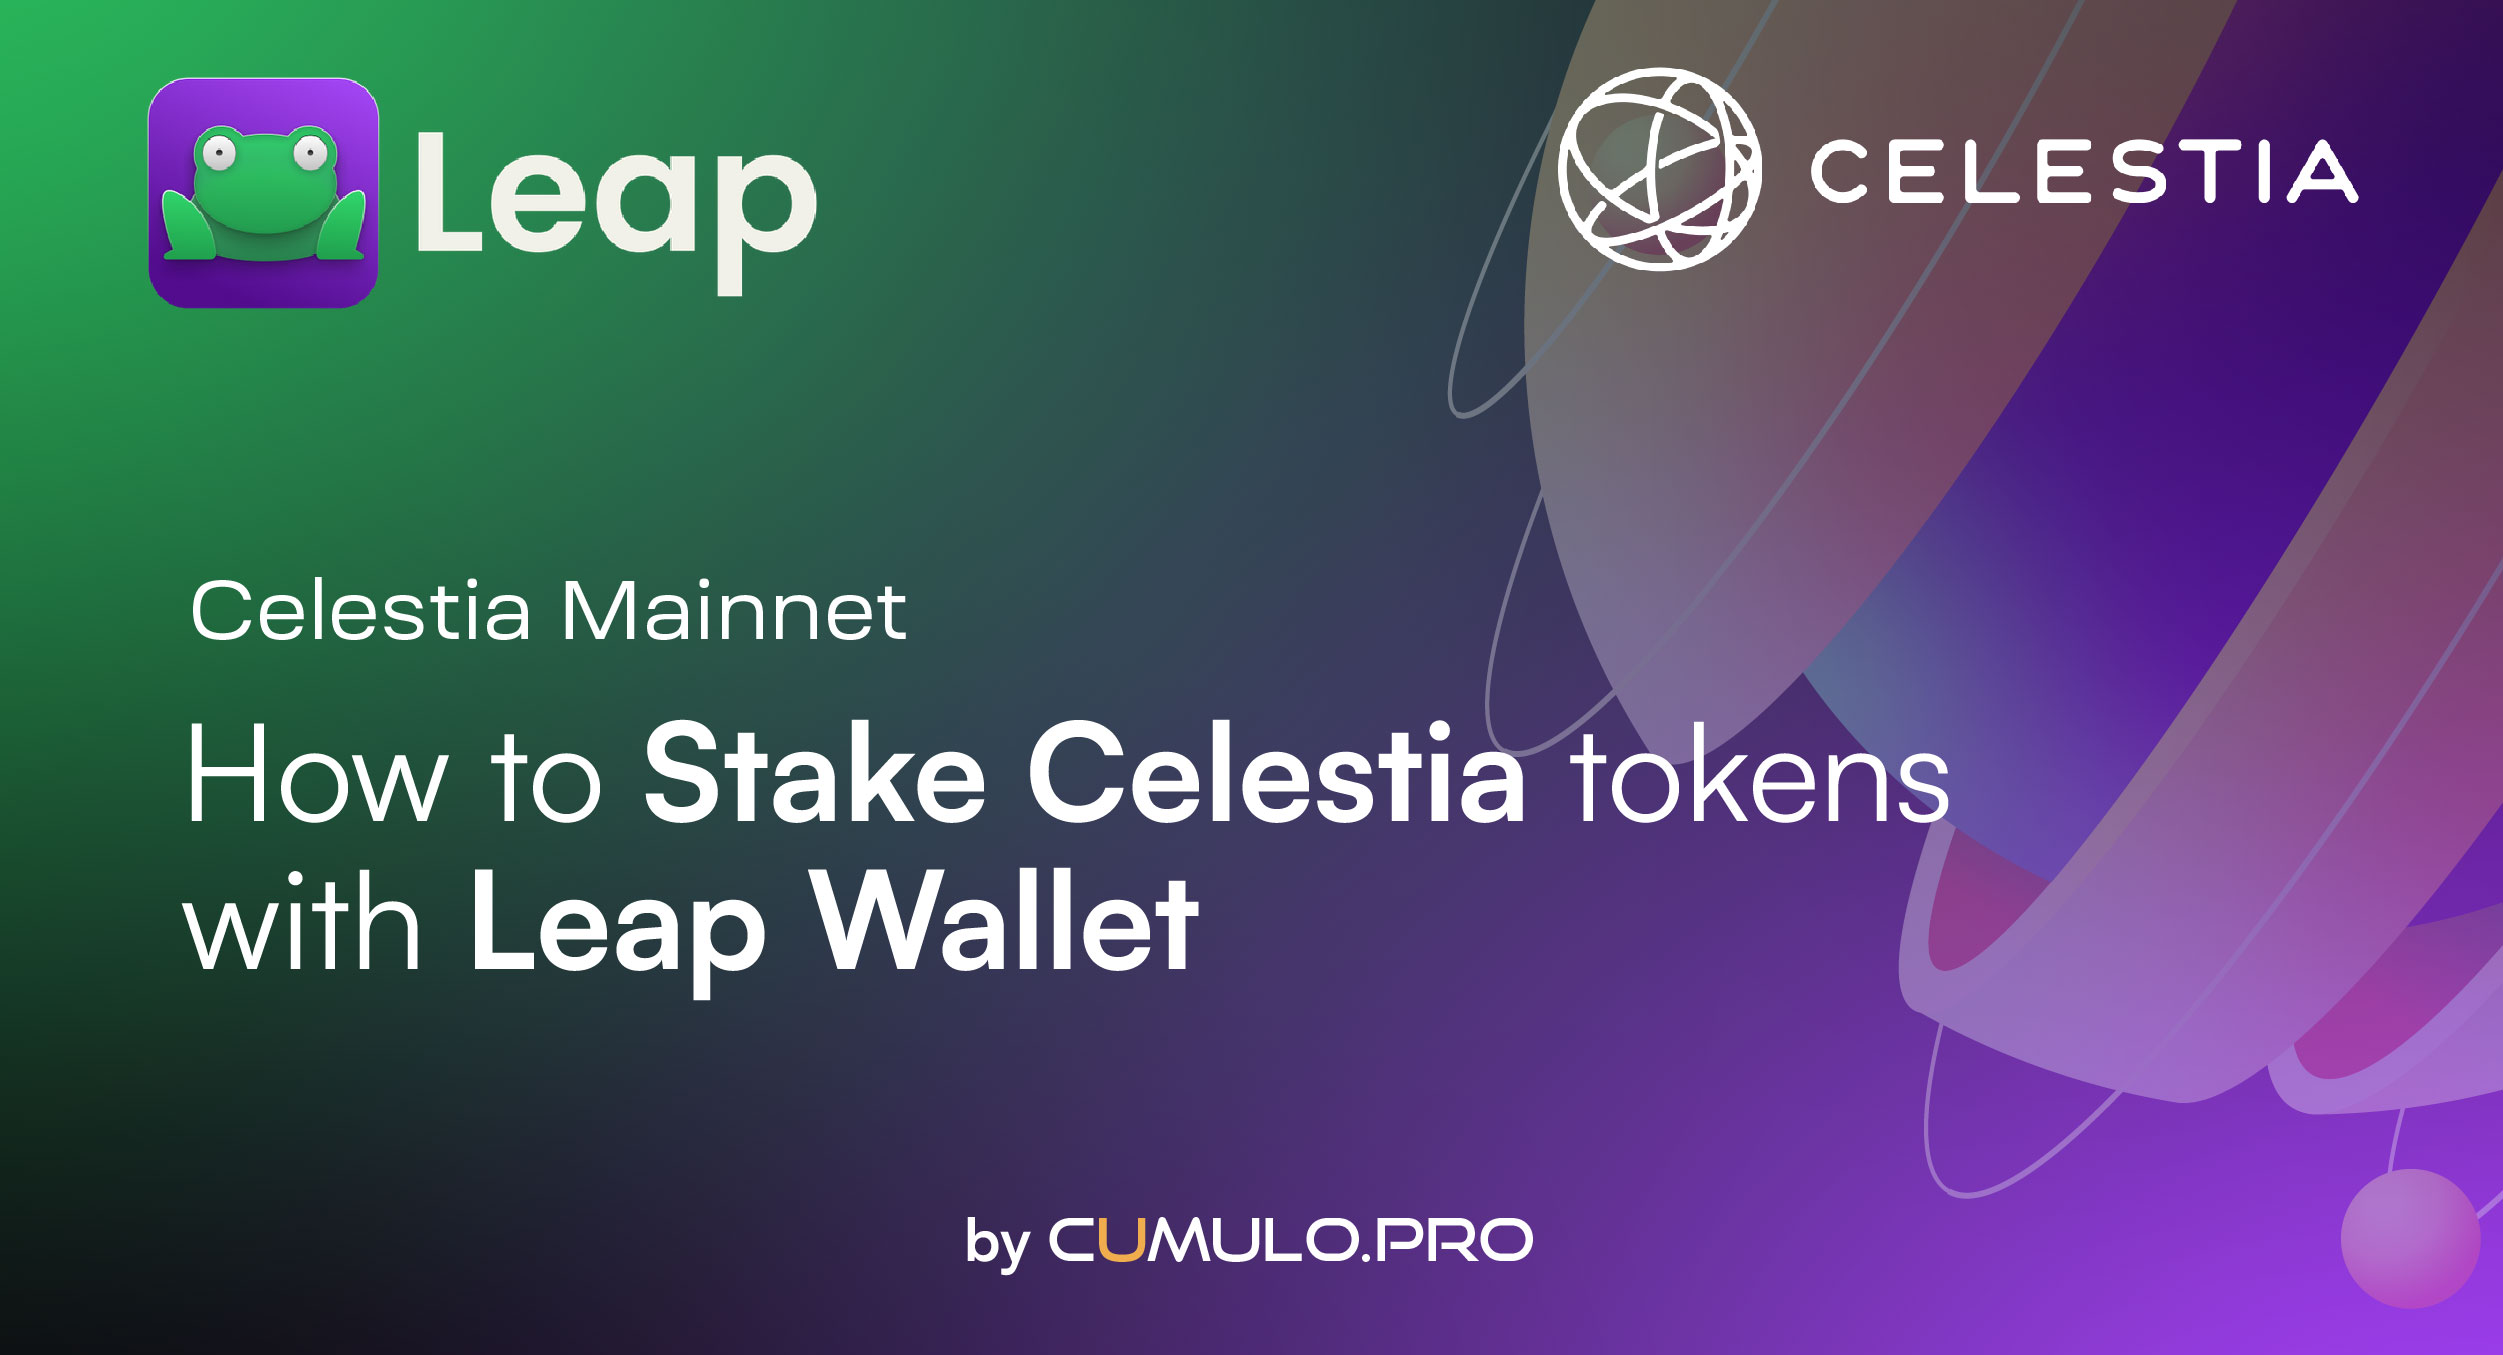 How to Staking Celestia tokens with Leap wallet